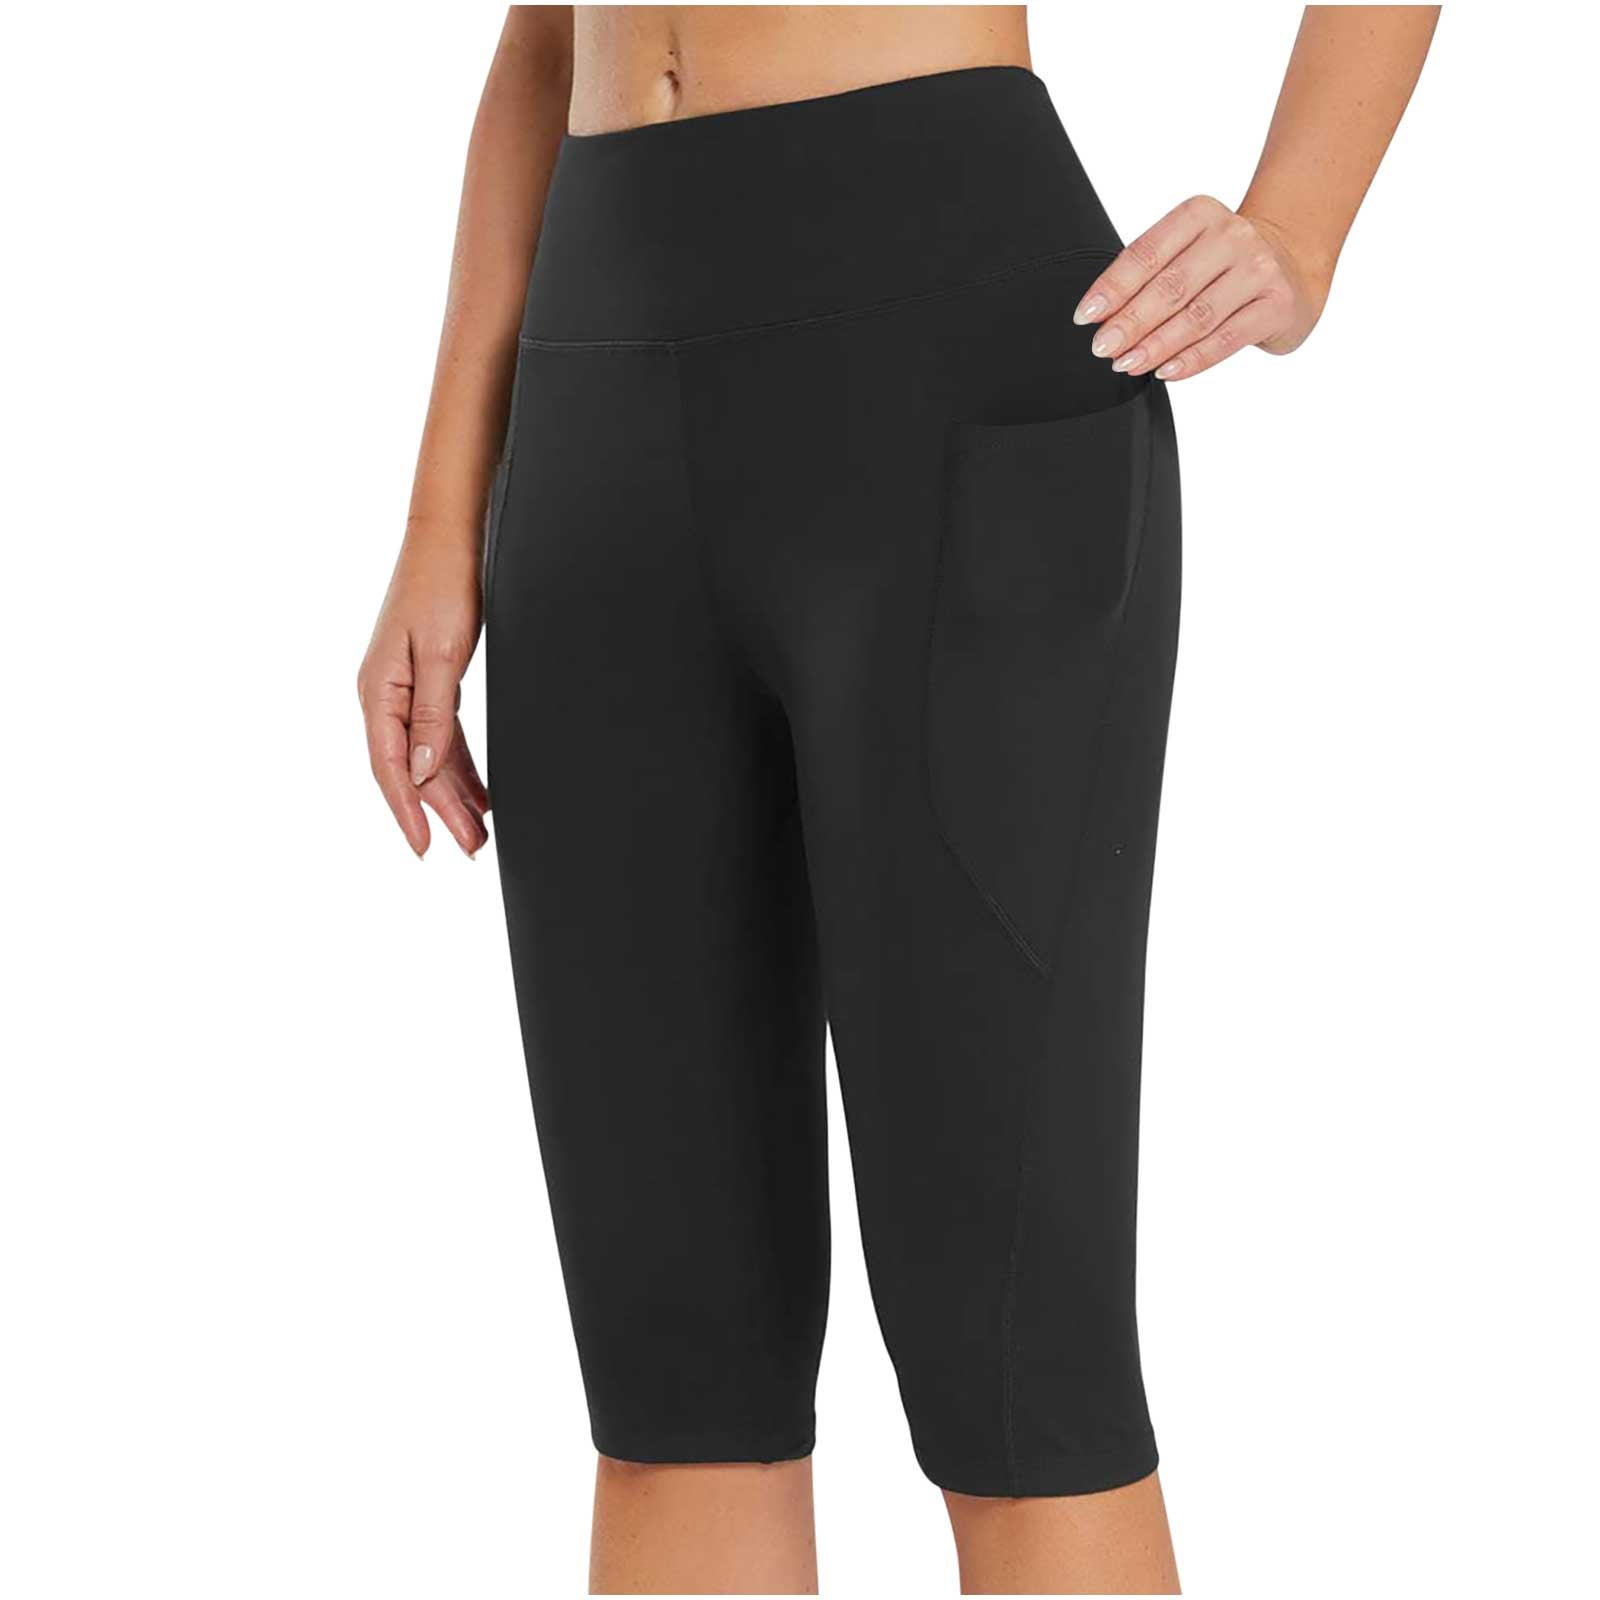 TheLovely Women & Plus Soft Cotton Active Stretch Workout India | Ubuy